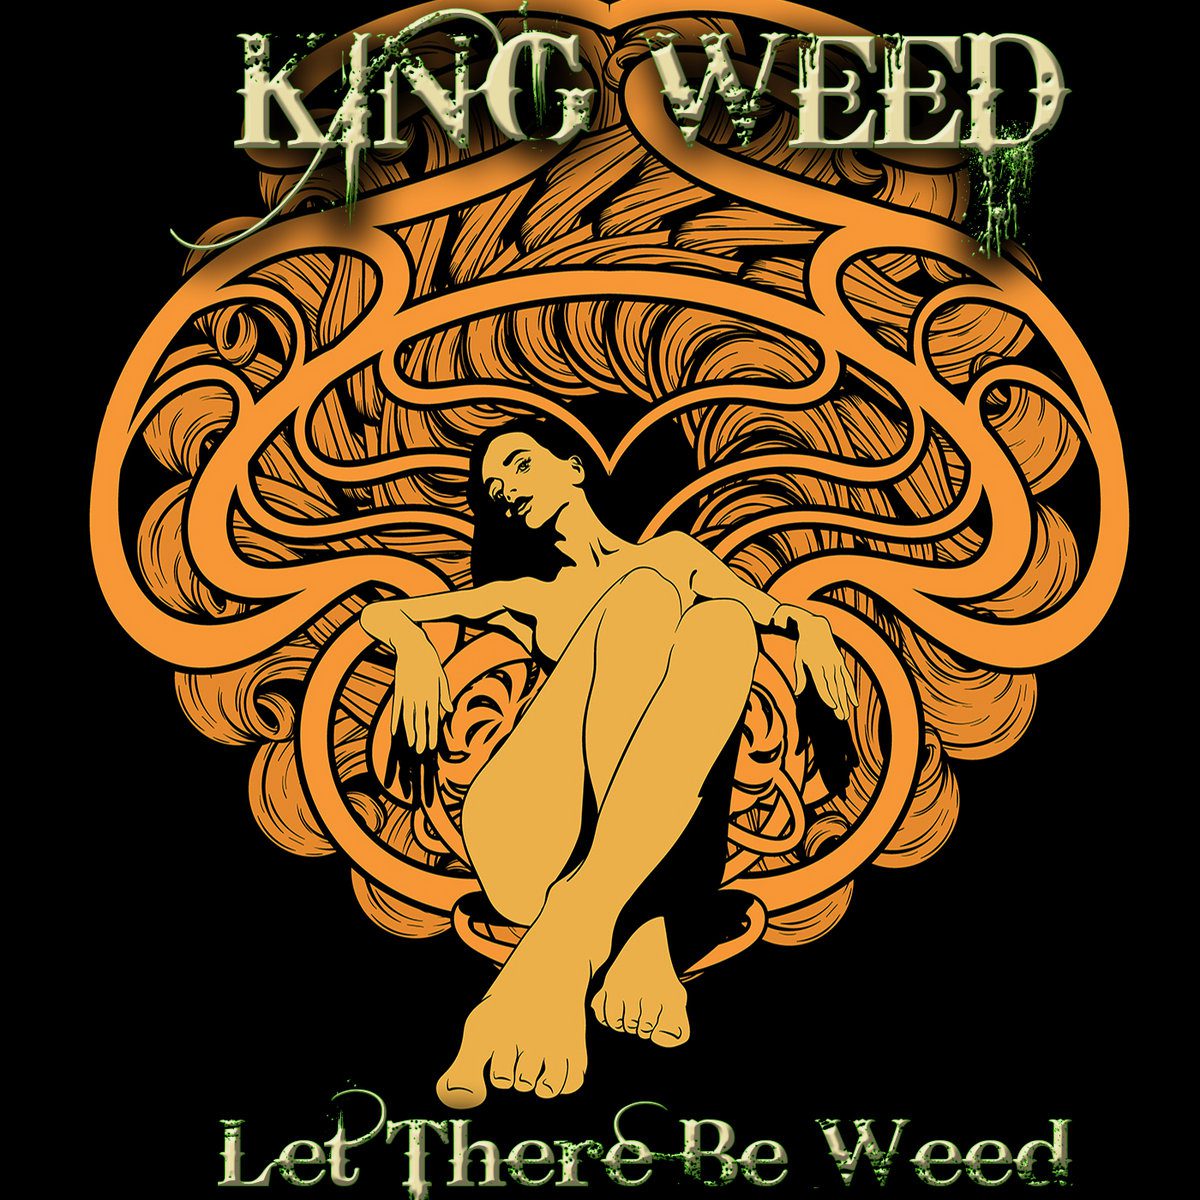 King Weed – Let There Be Weed (2021)